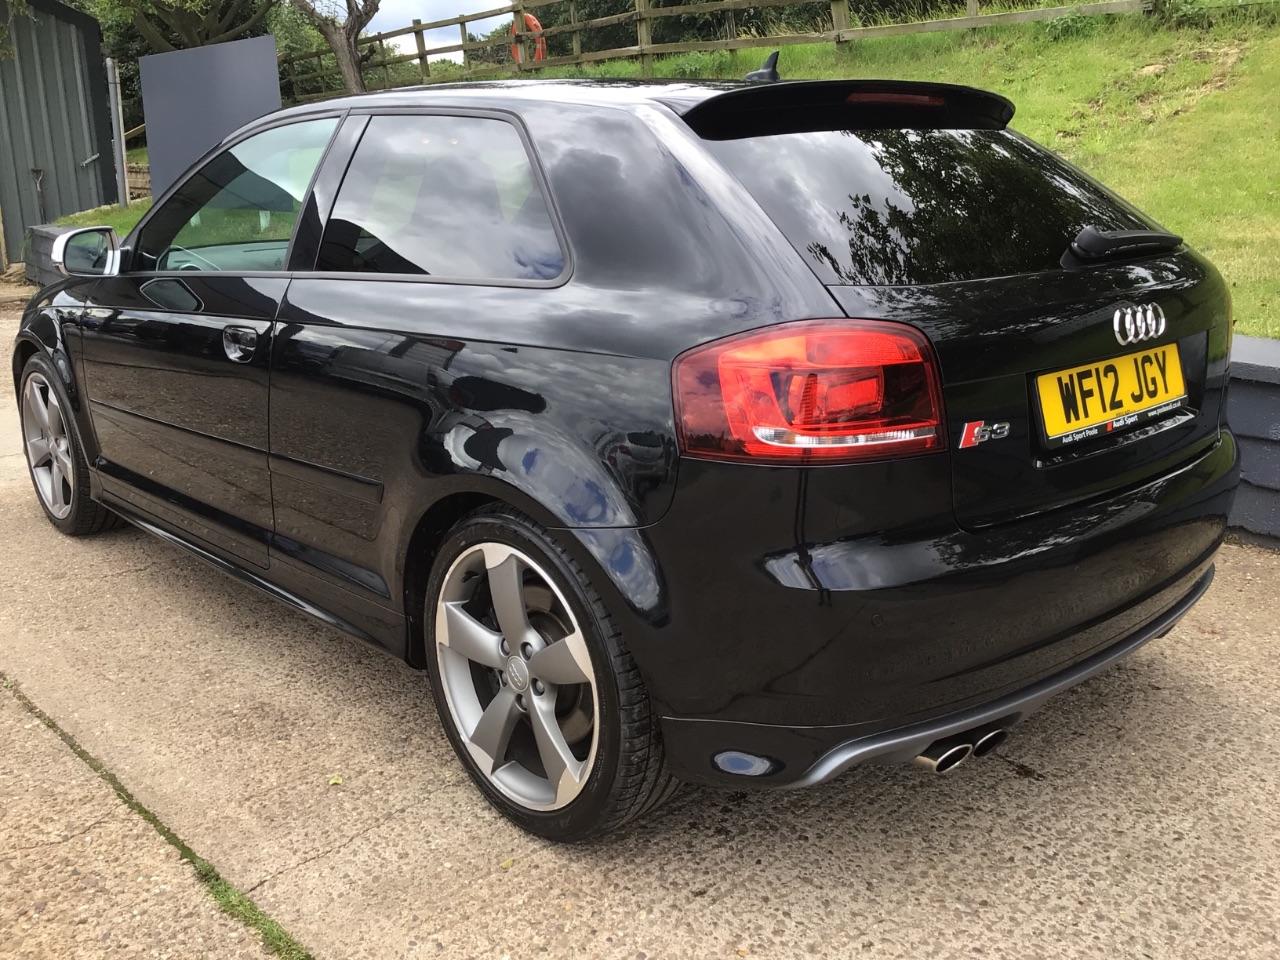 2012 Audi A3 2.0 S3 Quattro Black Edition 3dr [Technology] WINGBACKSFULL AUDI S/HISTORY